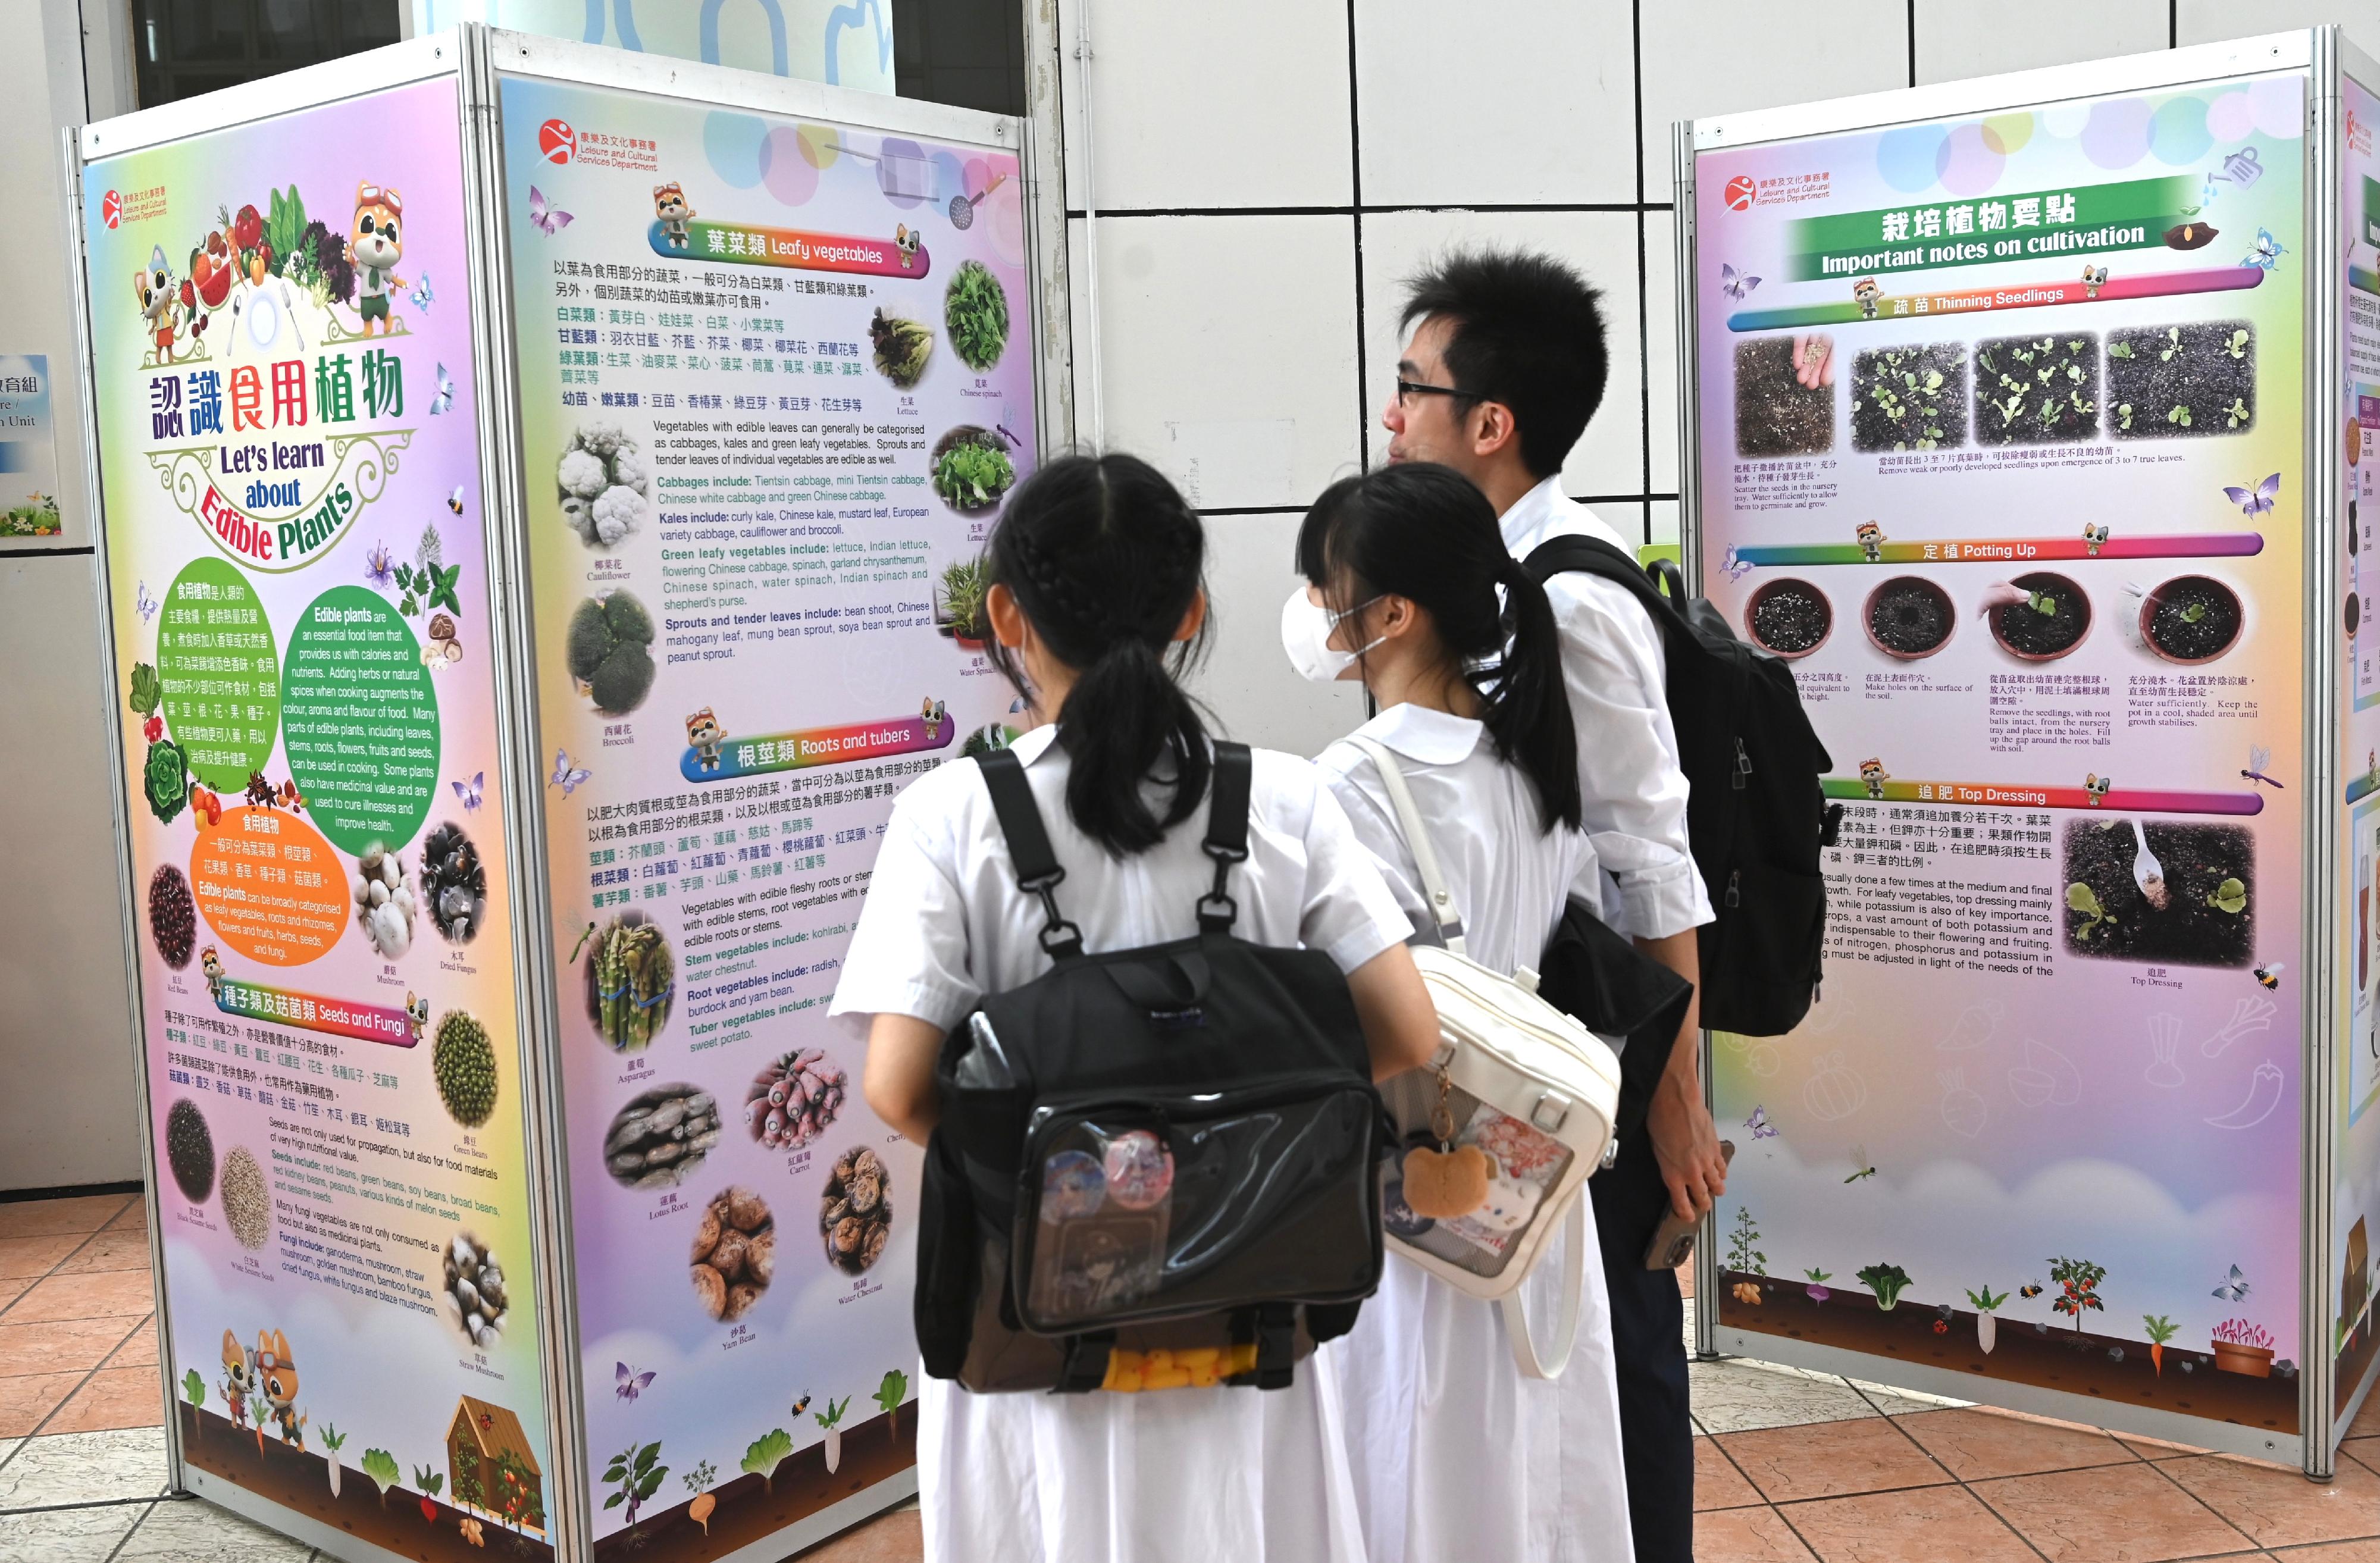 A horticultural education exhibition entitled "Let's learn about edible plants" and related activities are being held by the Leisure and Cultural Services Department today and tomorrow (July 22 and 23) from 10am to 5pm at the Arcade and the Green Education and Resource Centre of Kowloon Park. Members of the public can learn more about edible plants through descriptive display panels. Admission is free.
